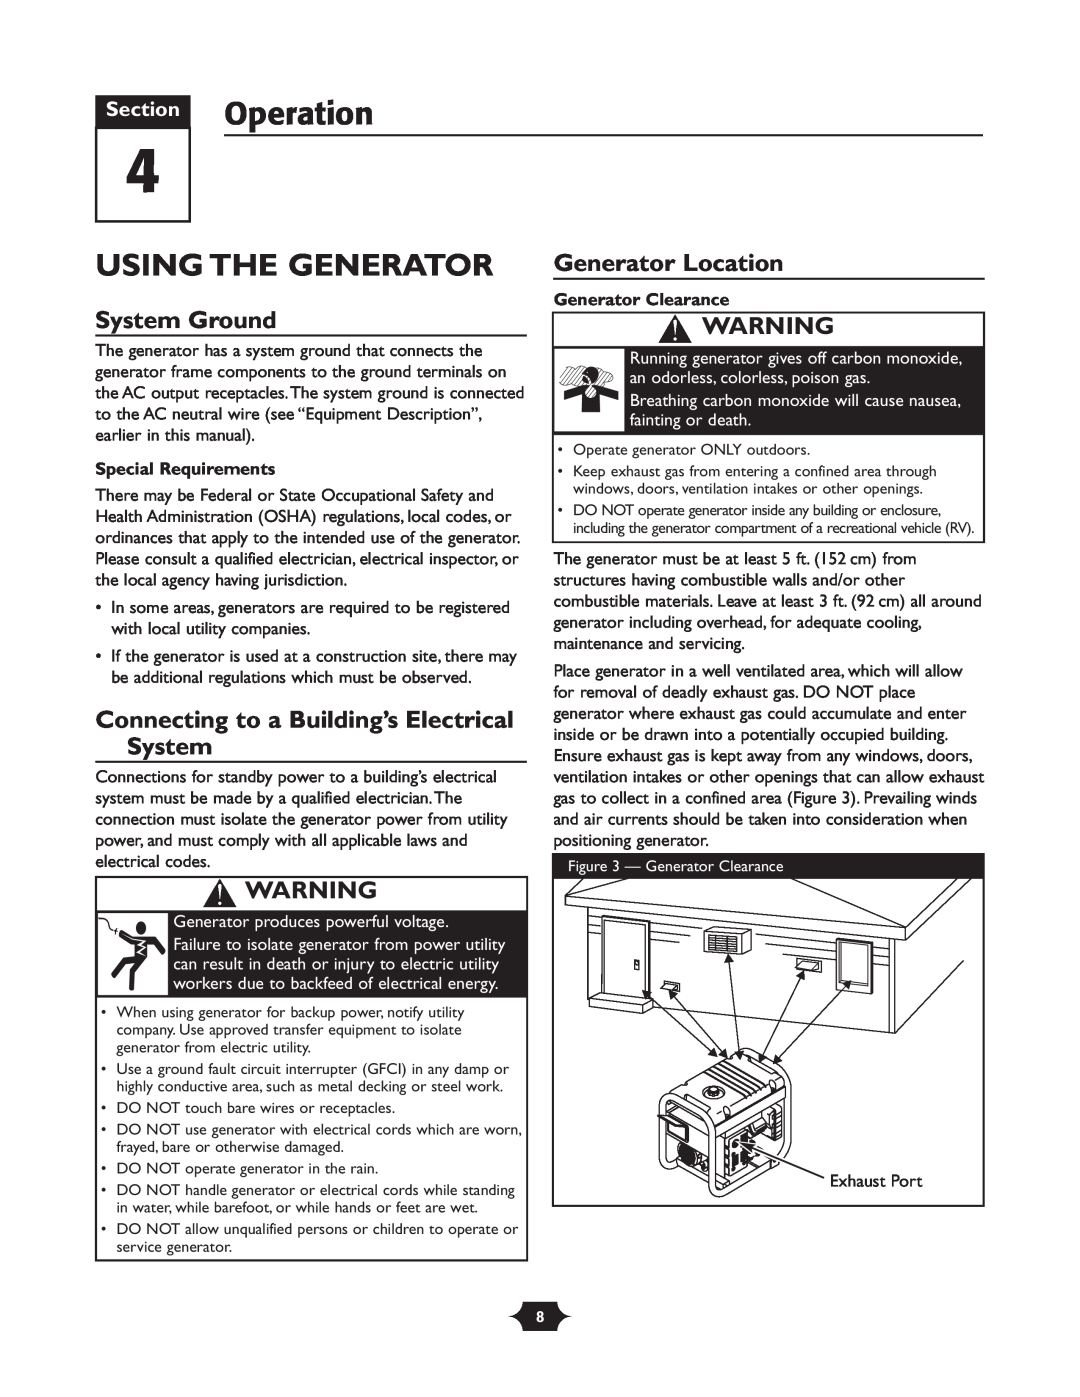 Troy-Bilt 1919 Section Operation, Using The Generator, System Ground, Connecting to a Building’s Electrical System 